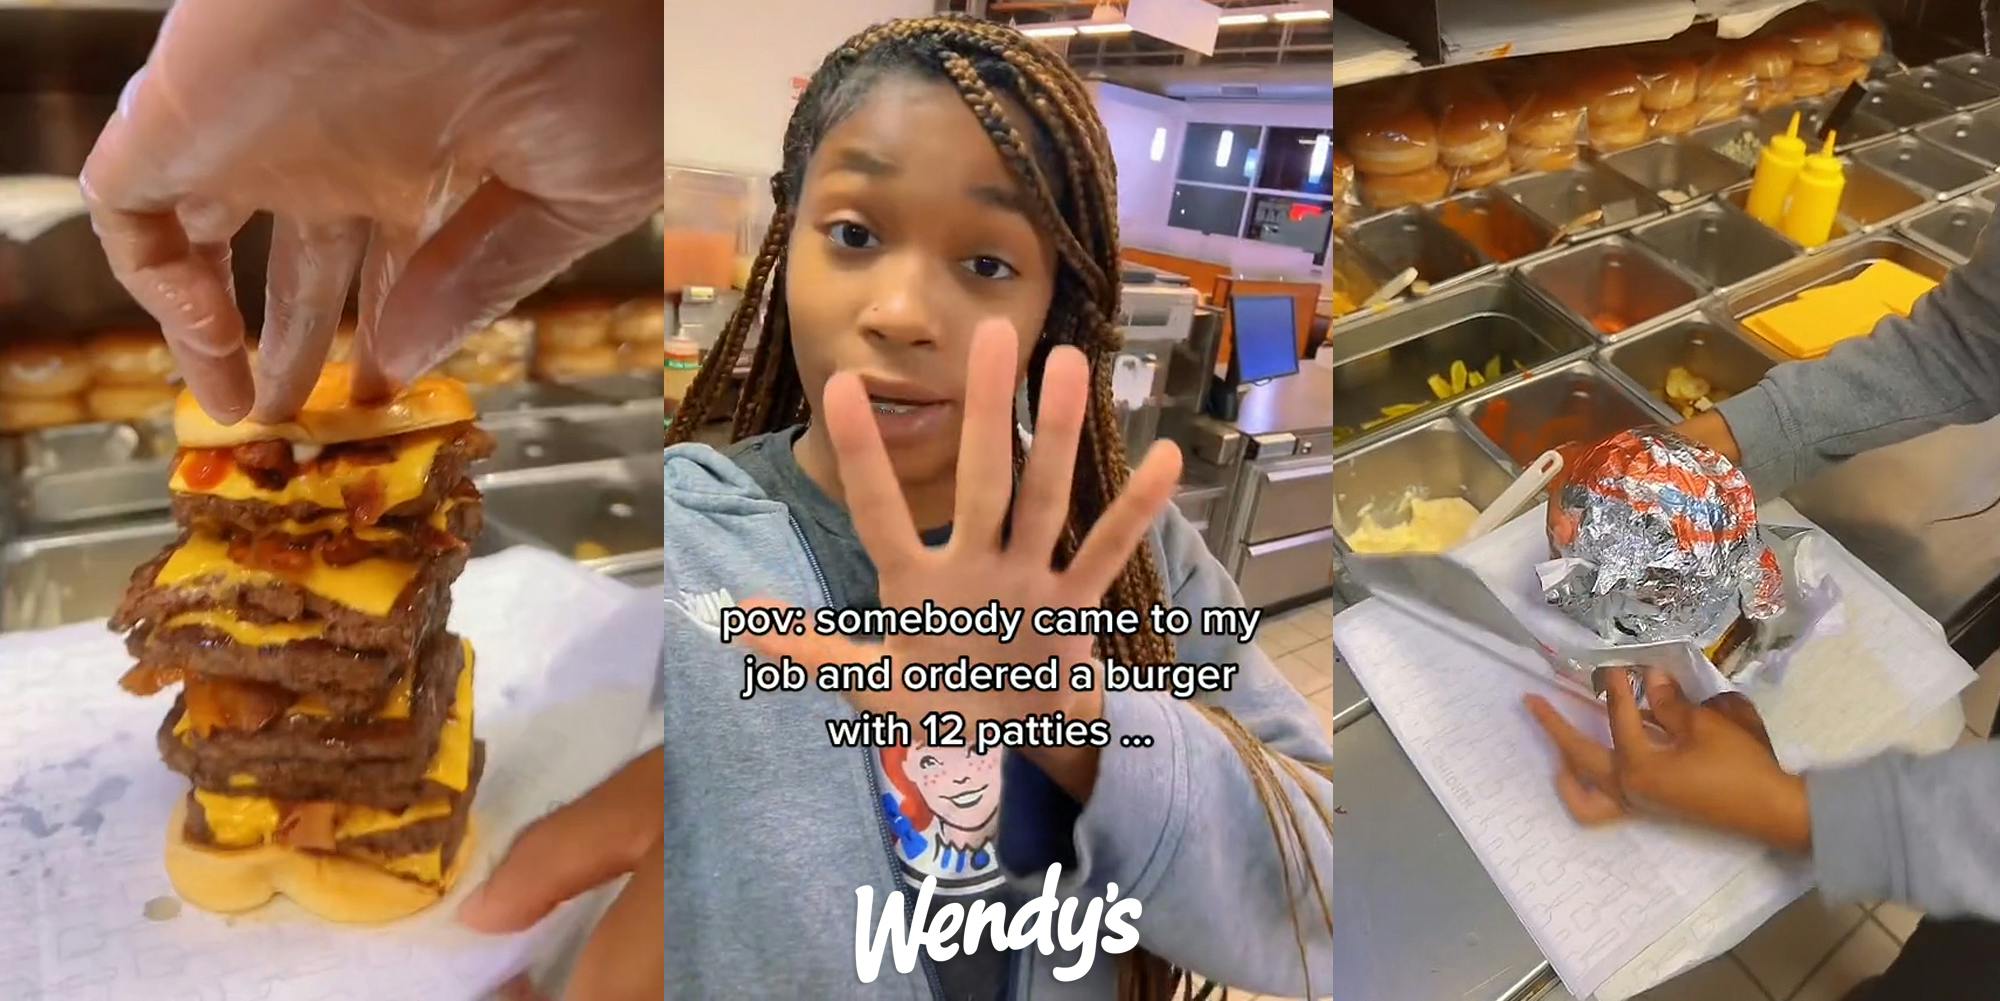 Wendy's employees holding giant burger together (l) Wendy's employee with caption "pov: somebody came to my job and ordered a burger with 12 patties..." with Wendy's logo at bottom (c) Wendy's employee wrapping giant burger (r)